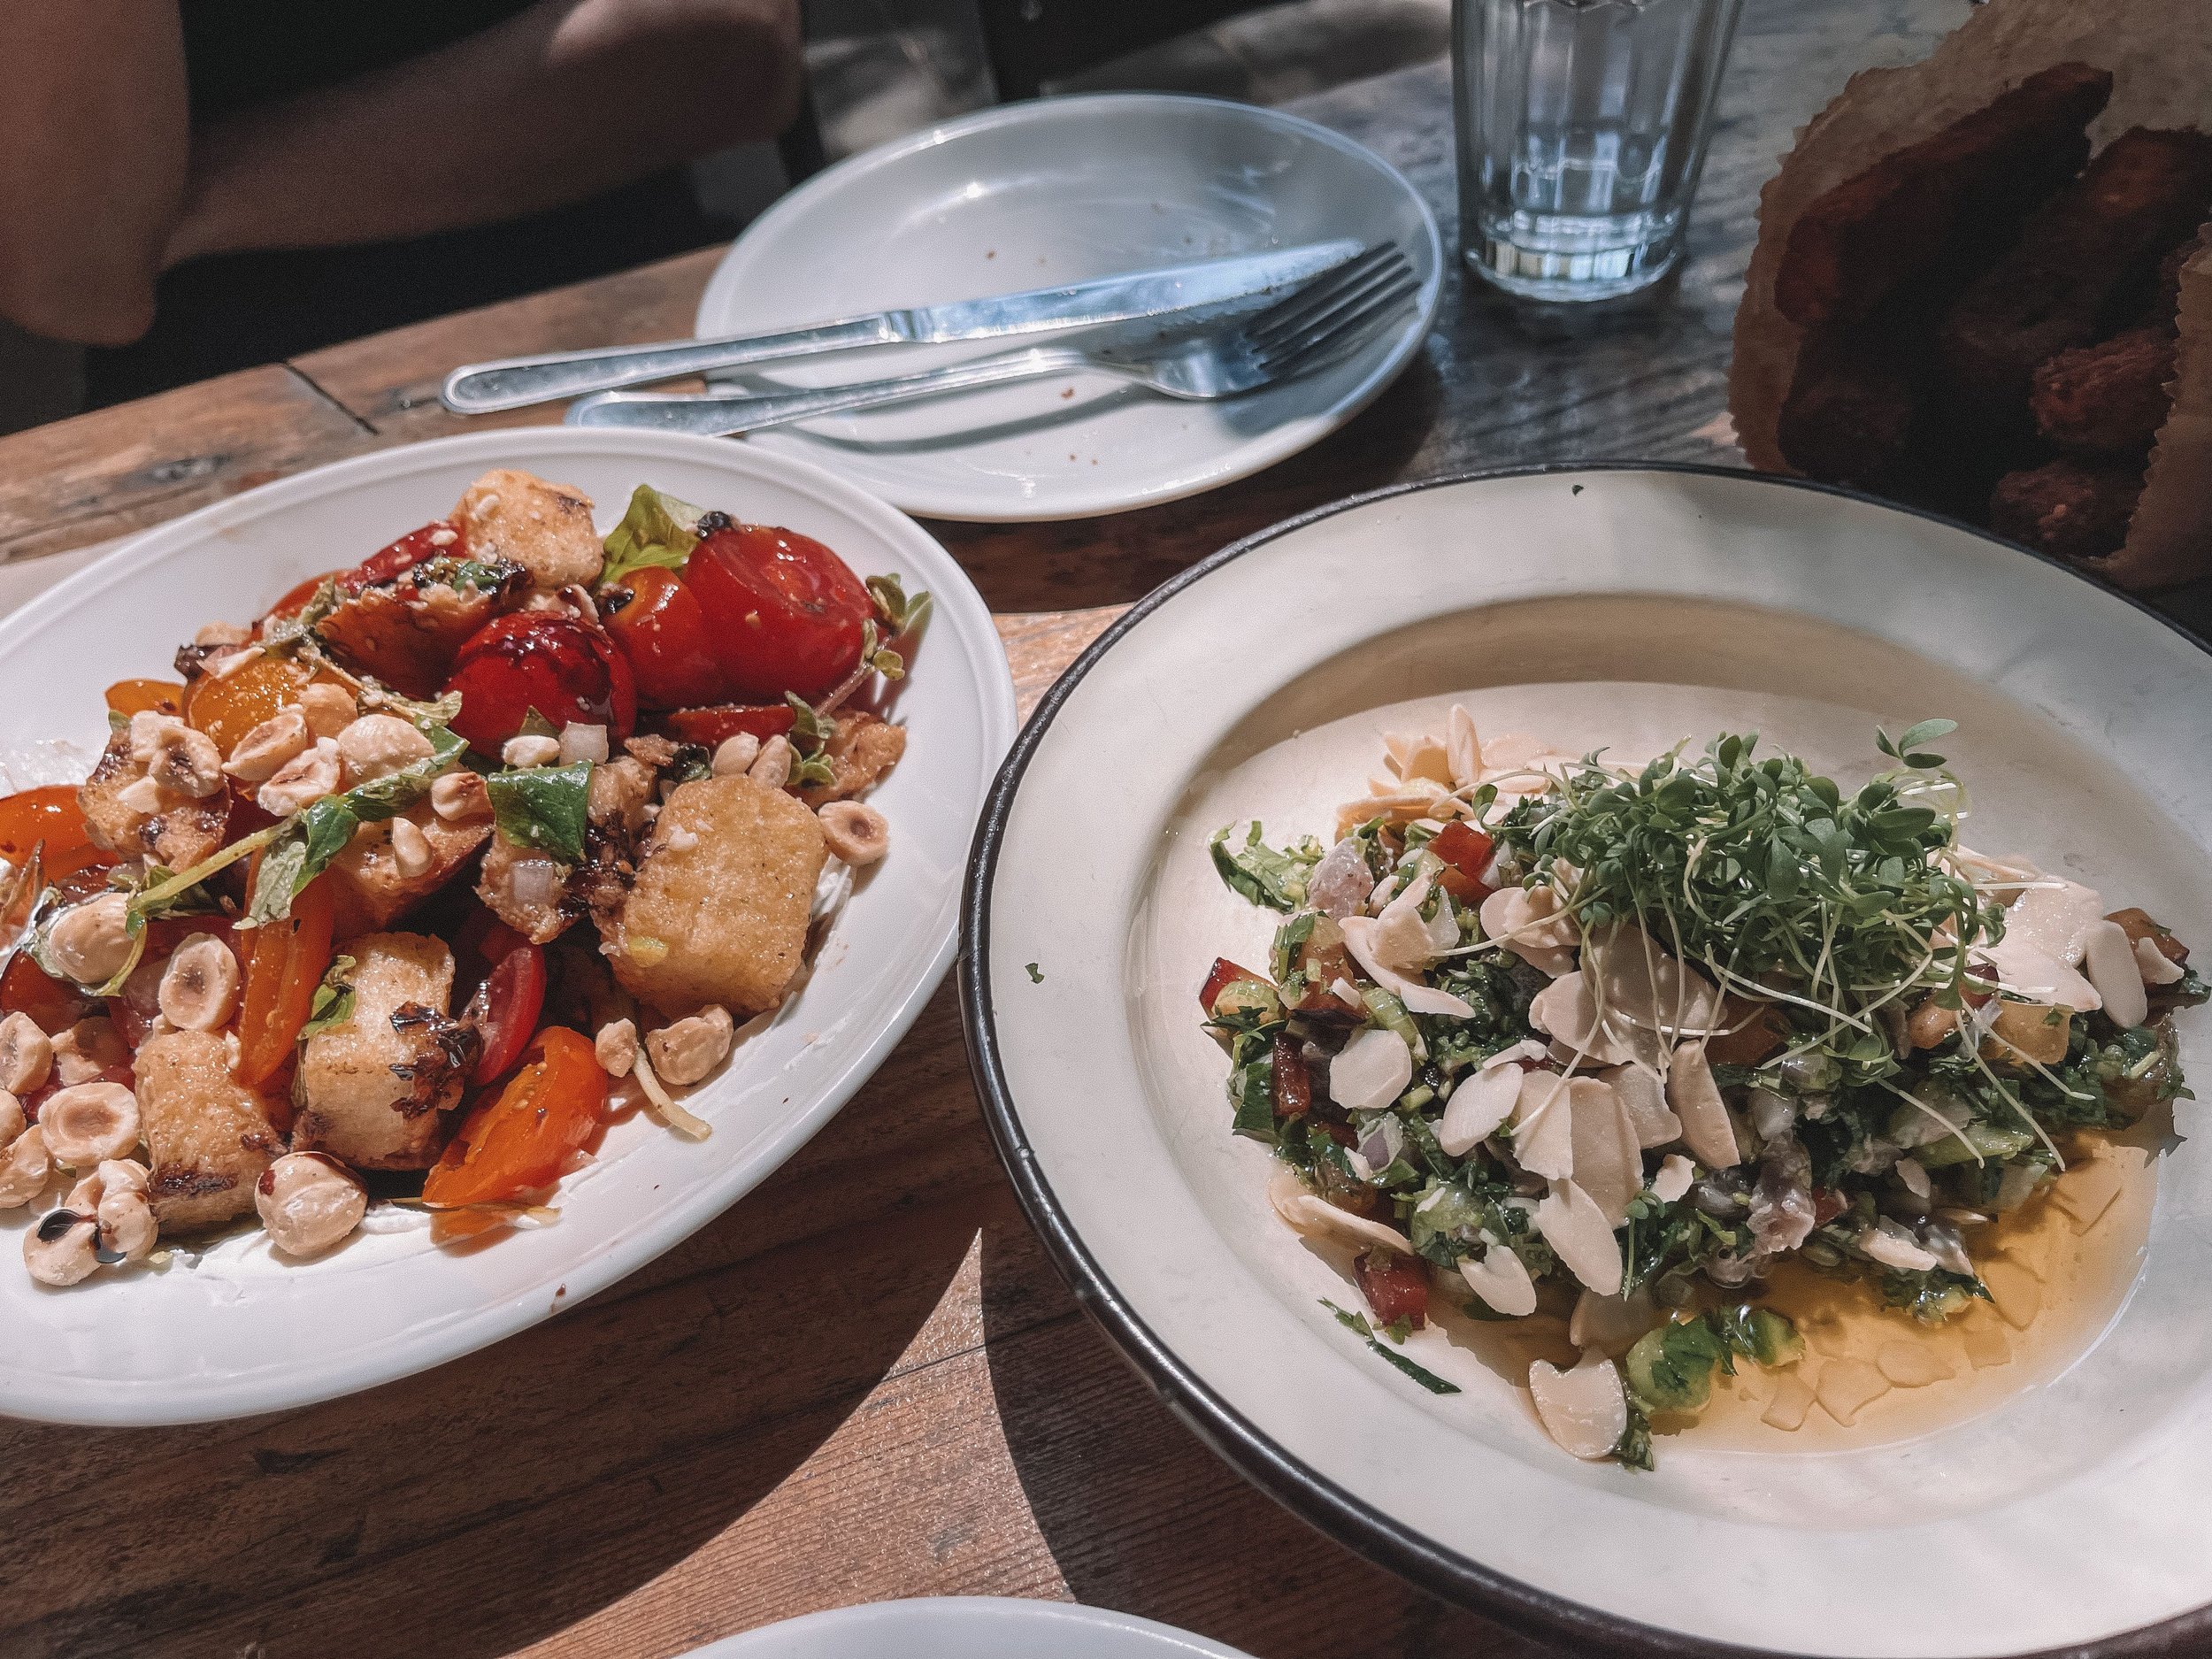 The delicious food from Bicicletta for lunch - Tel Aviv - Israel